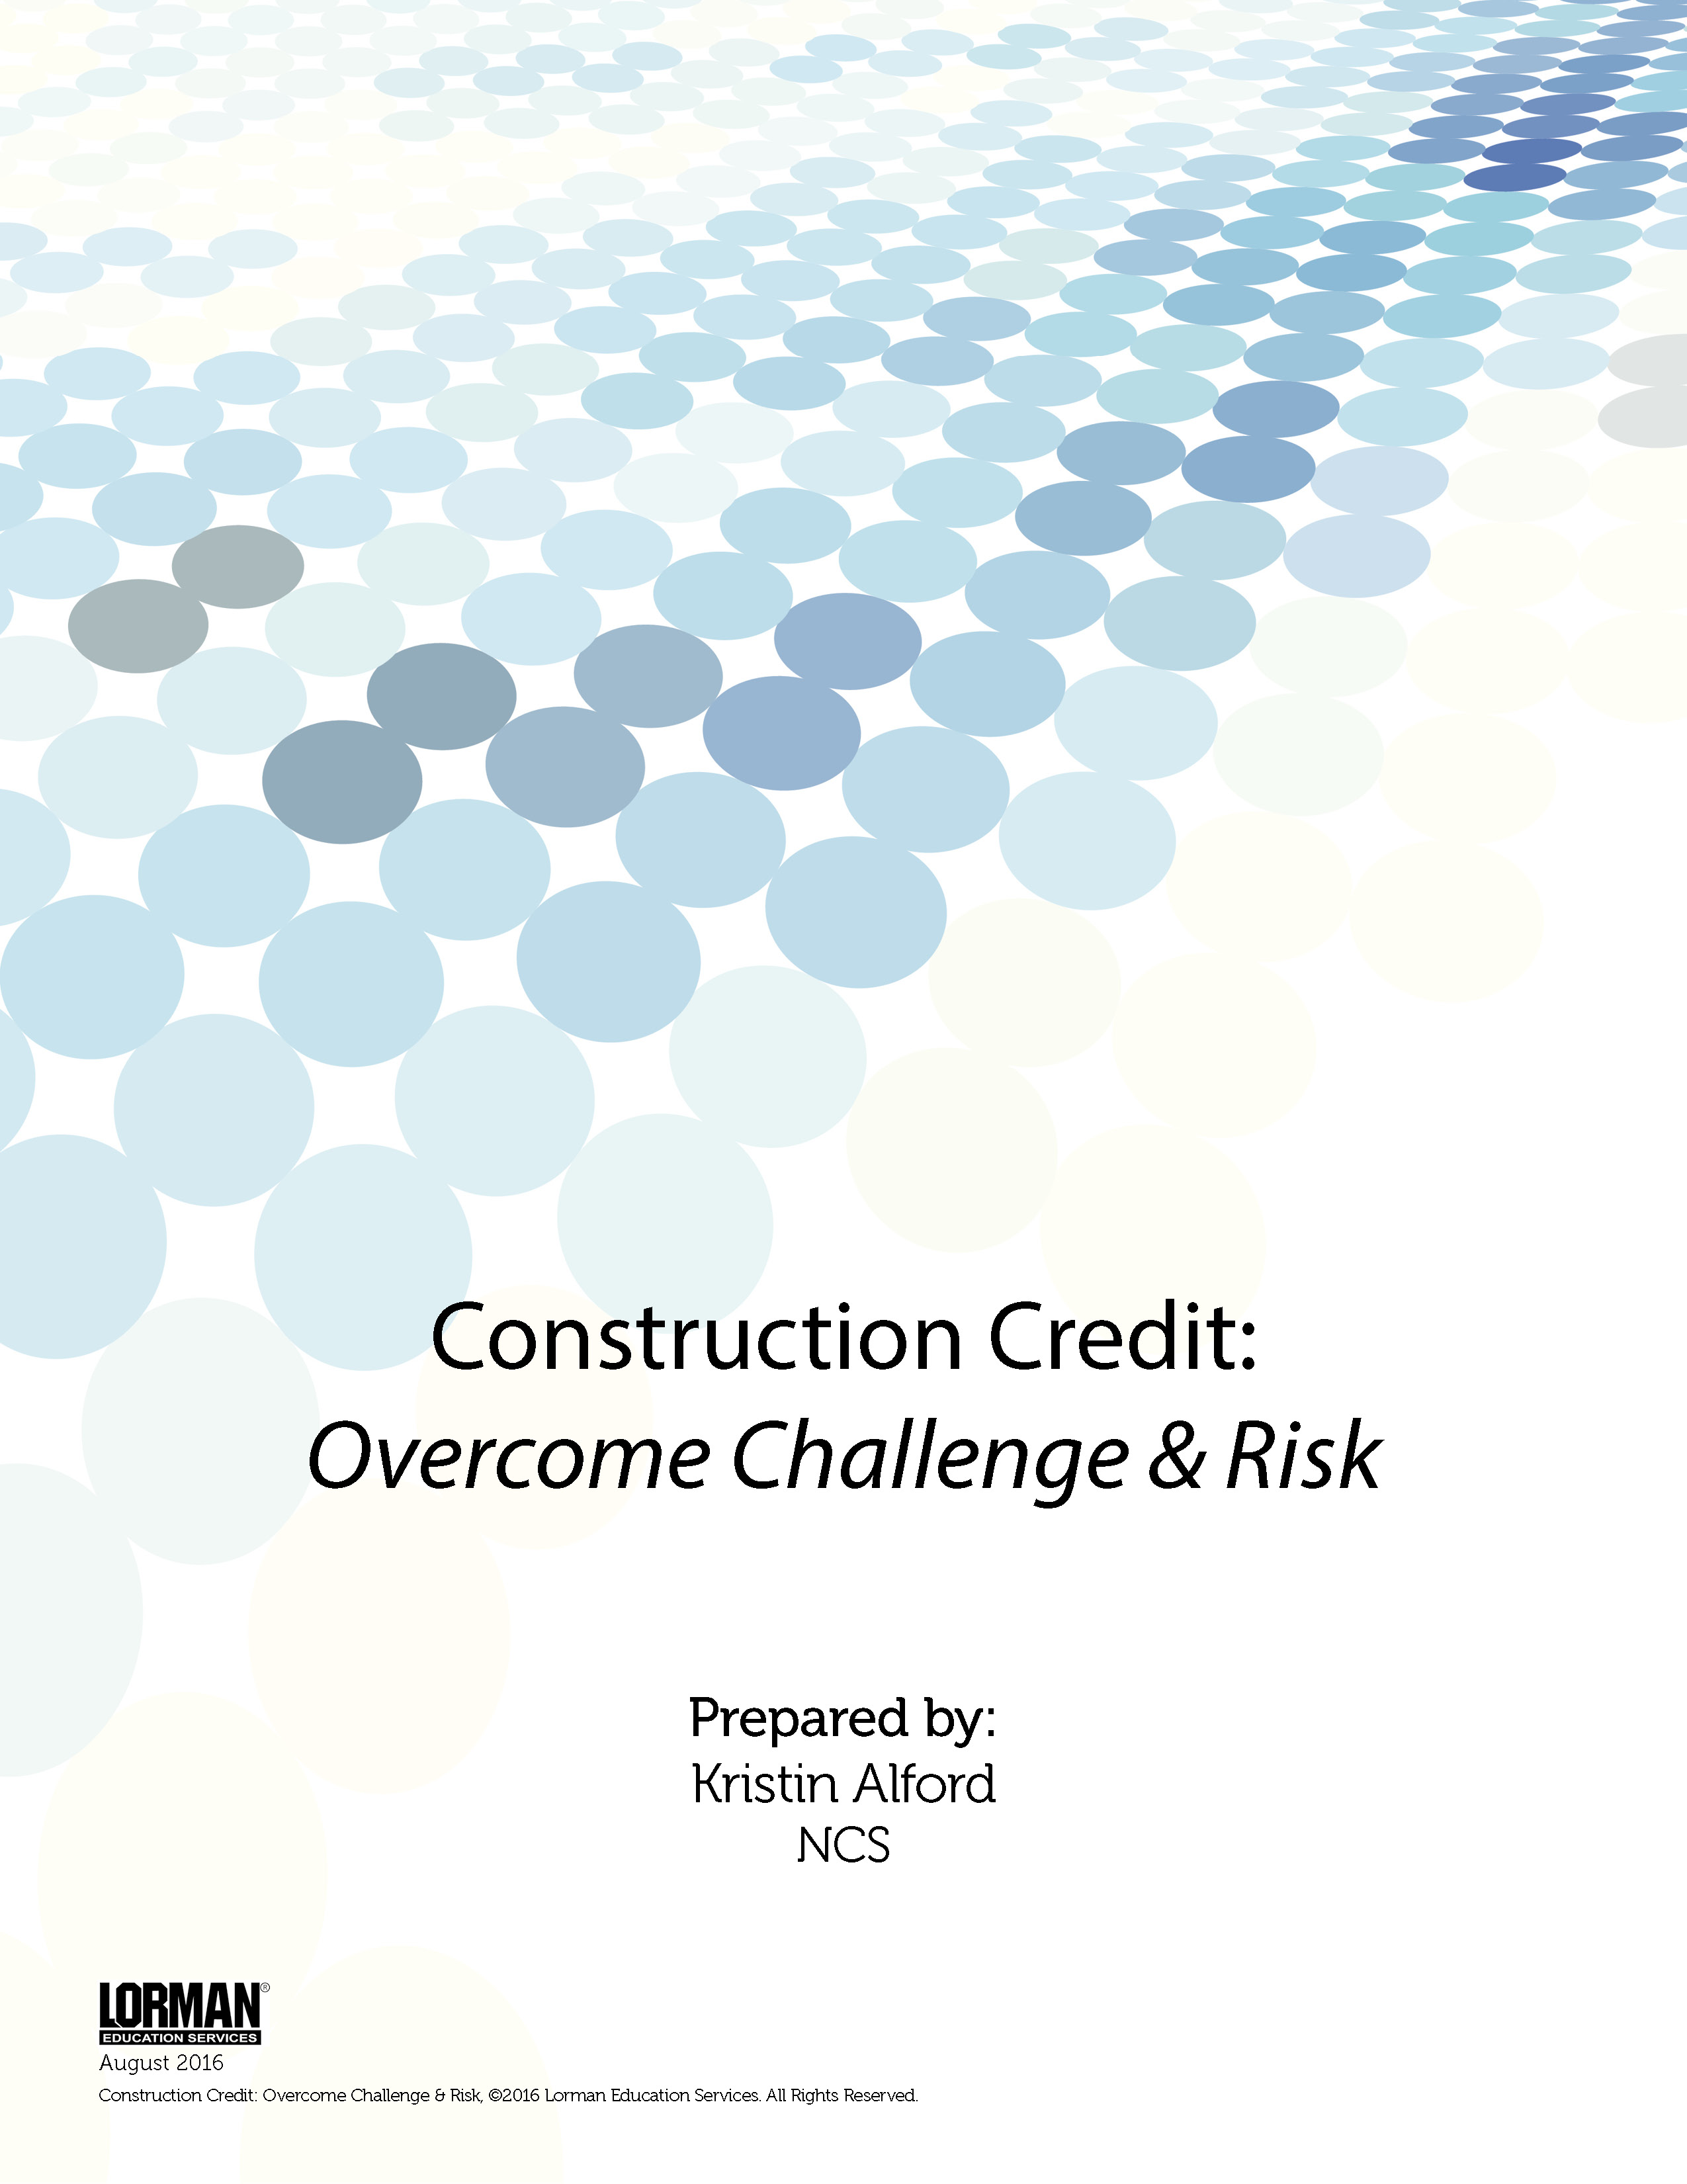 Construction Credit - Overcome Challenge and Risk